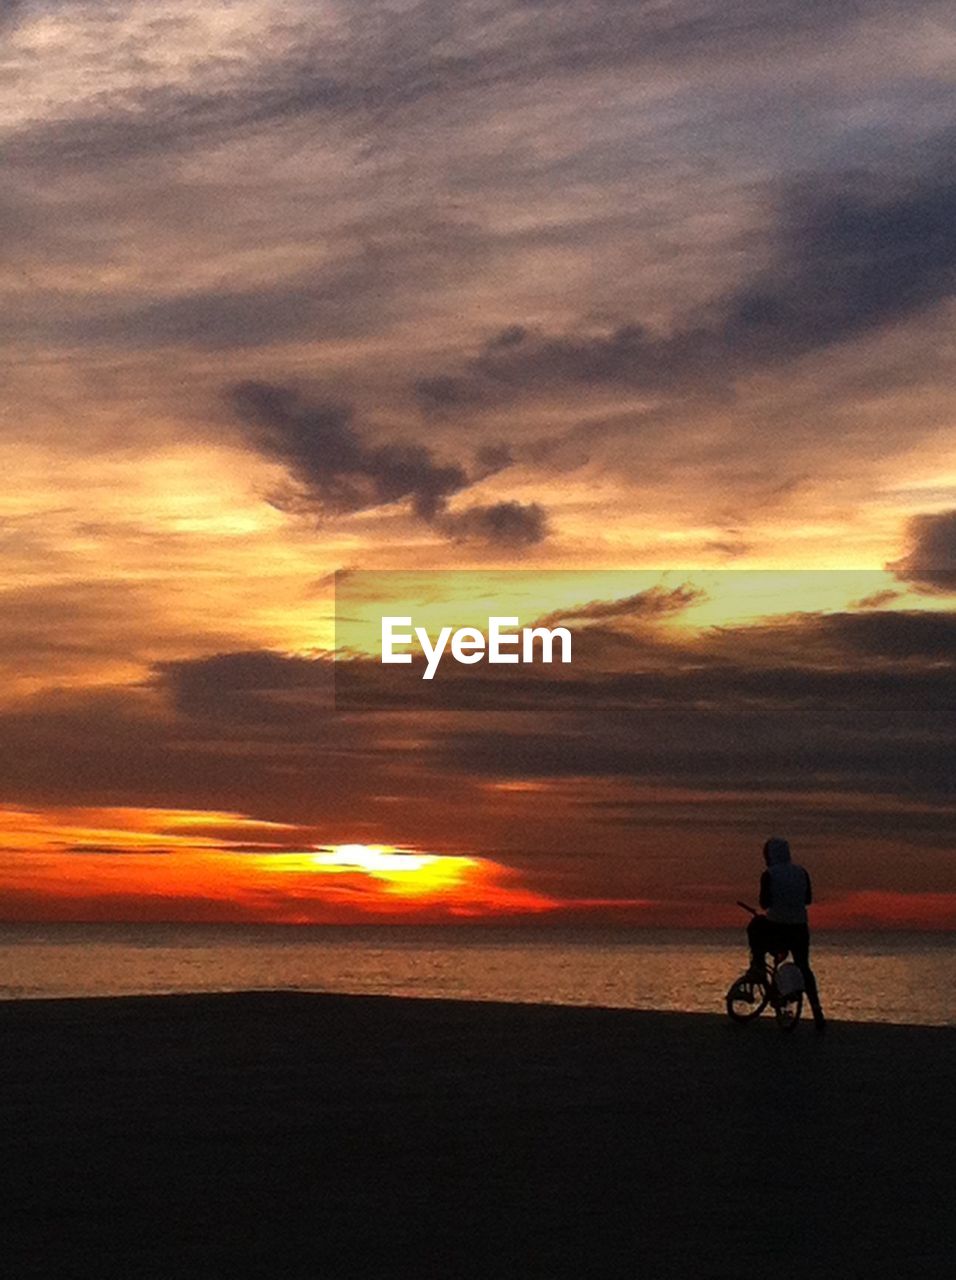 Man on bicycle on beach at sunset